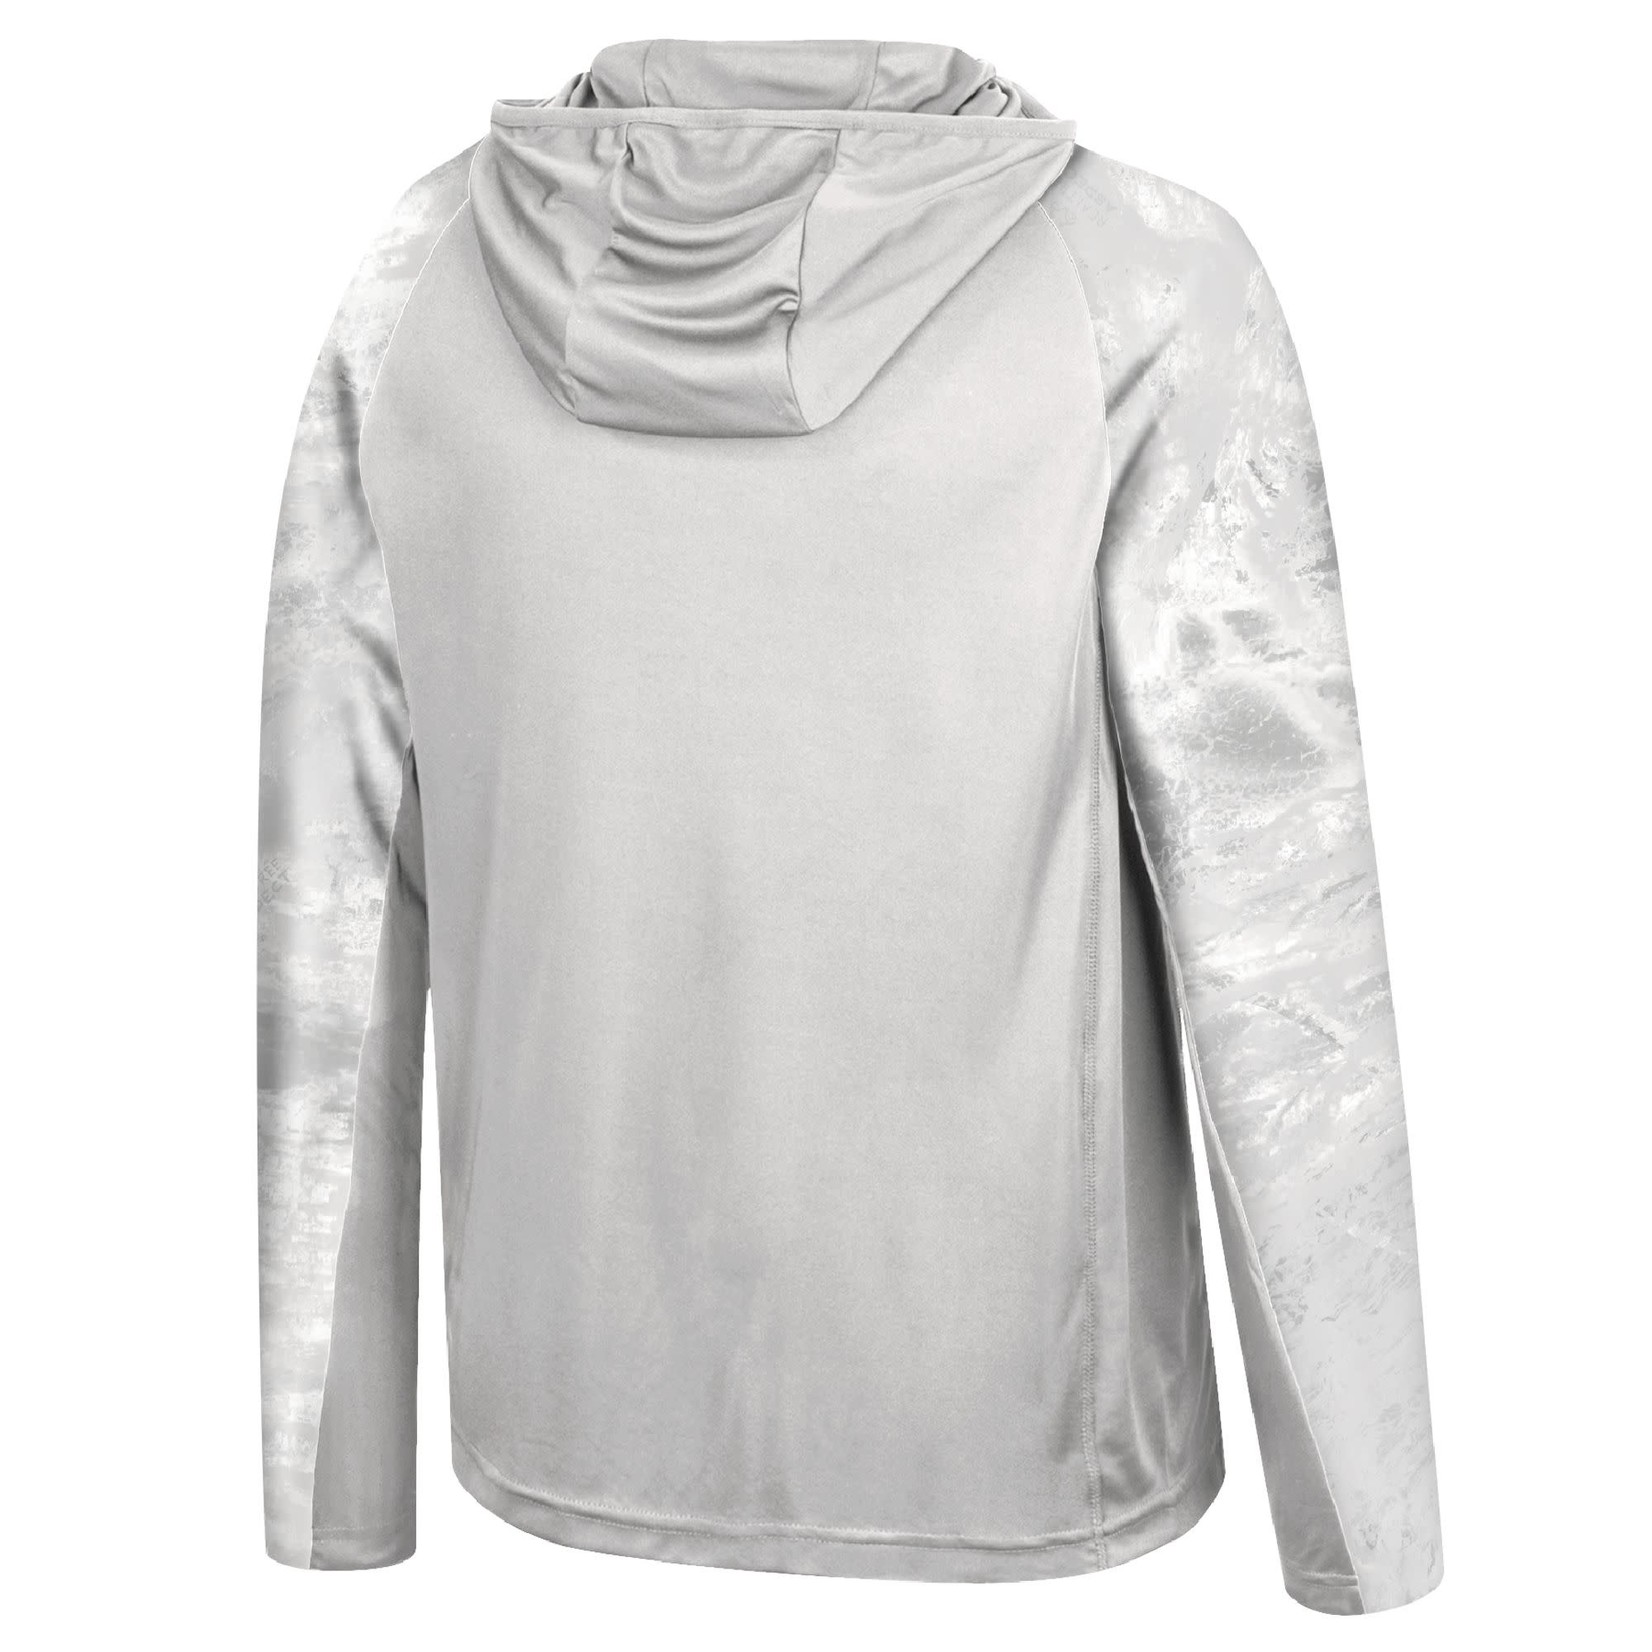 Colosseum Athletics Whiteout Performance Long Sleeve Hooded Fishing Tee